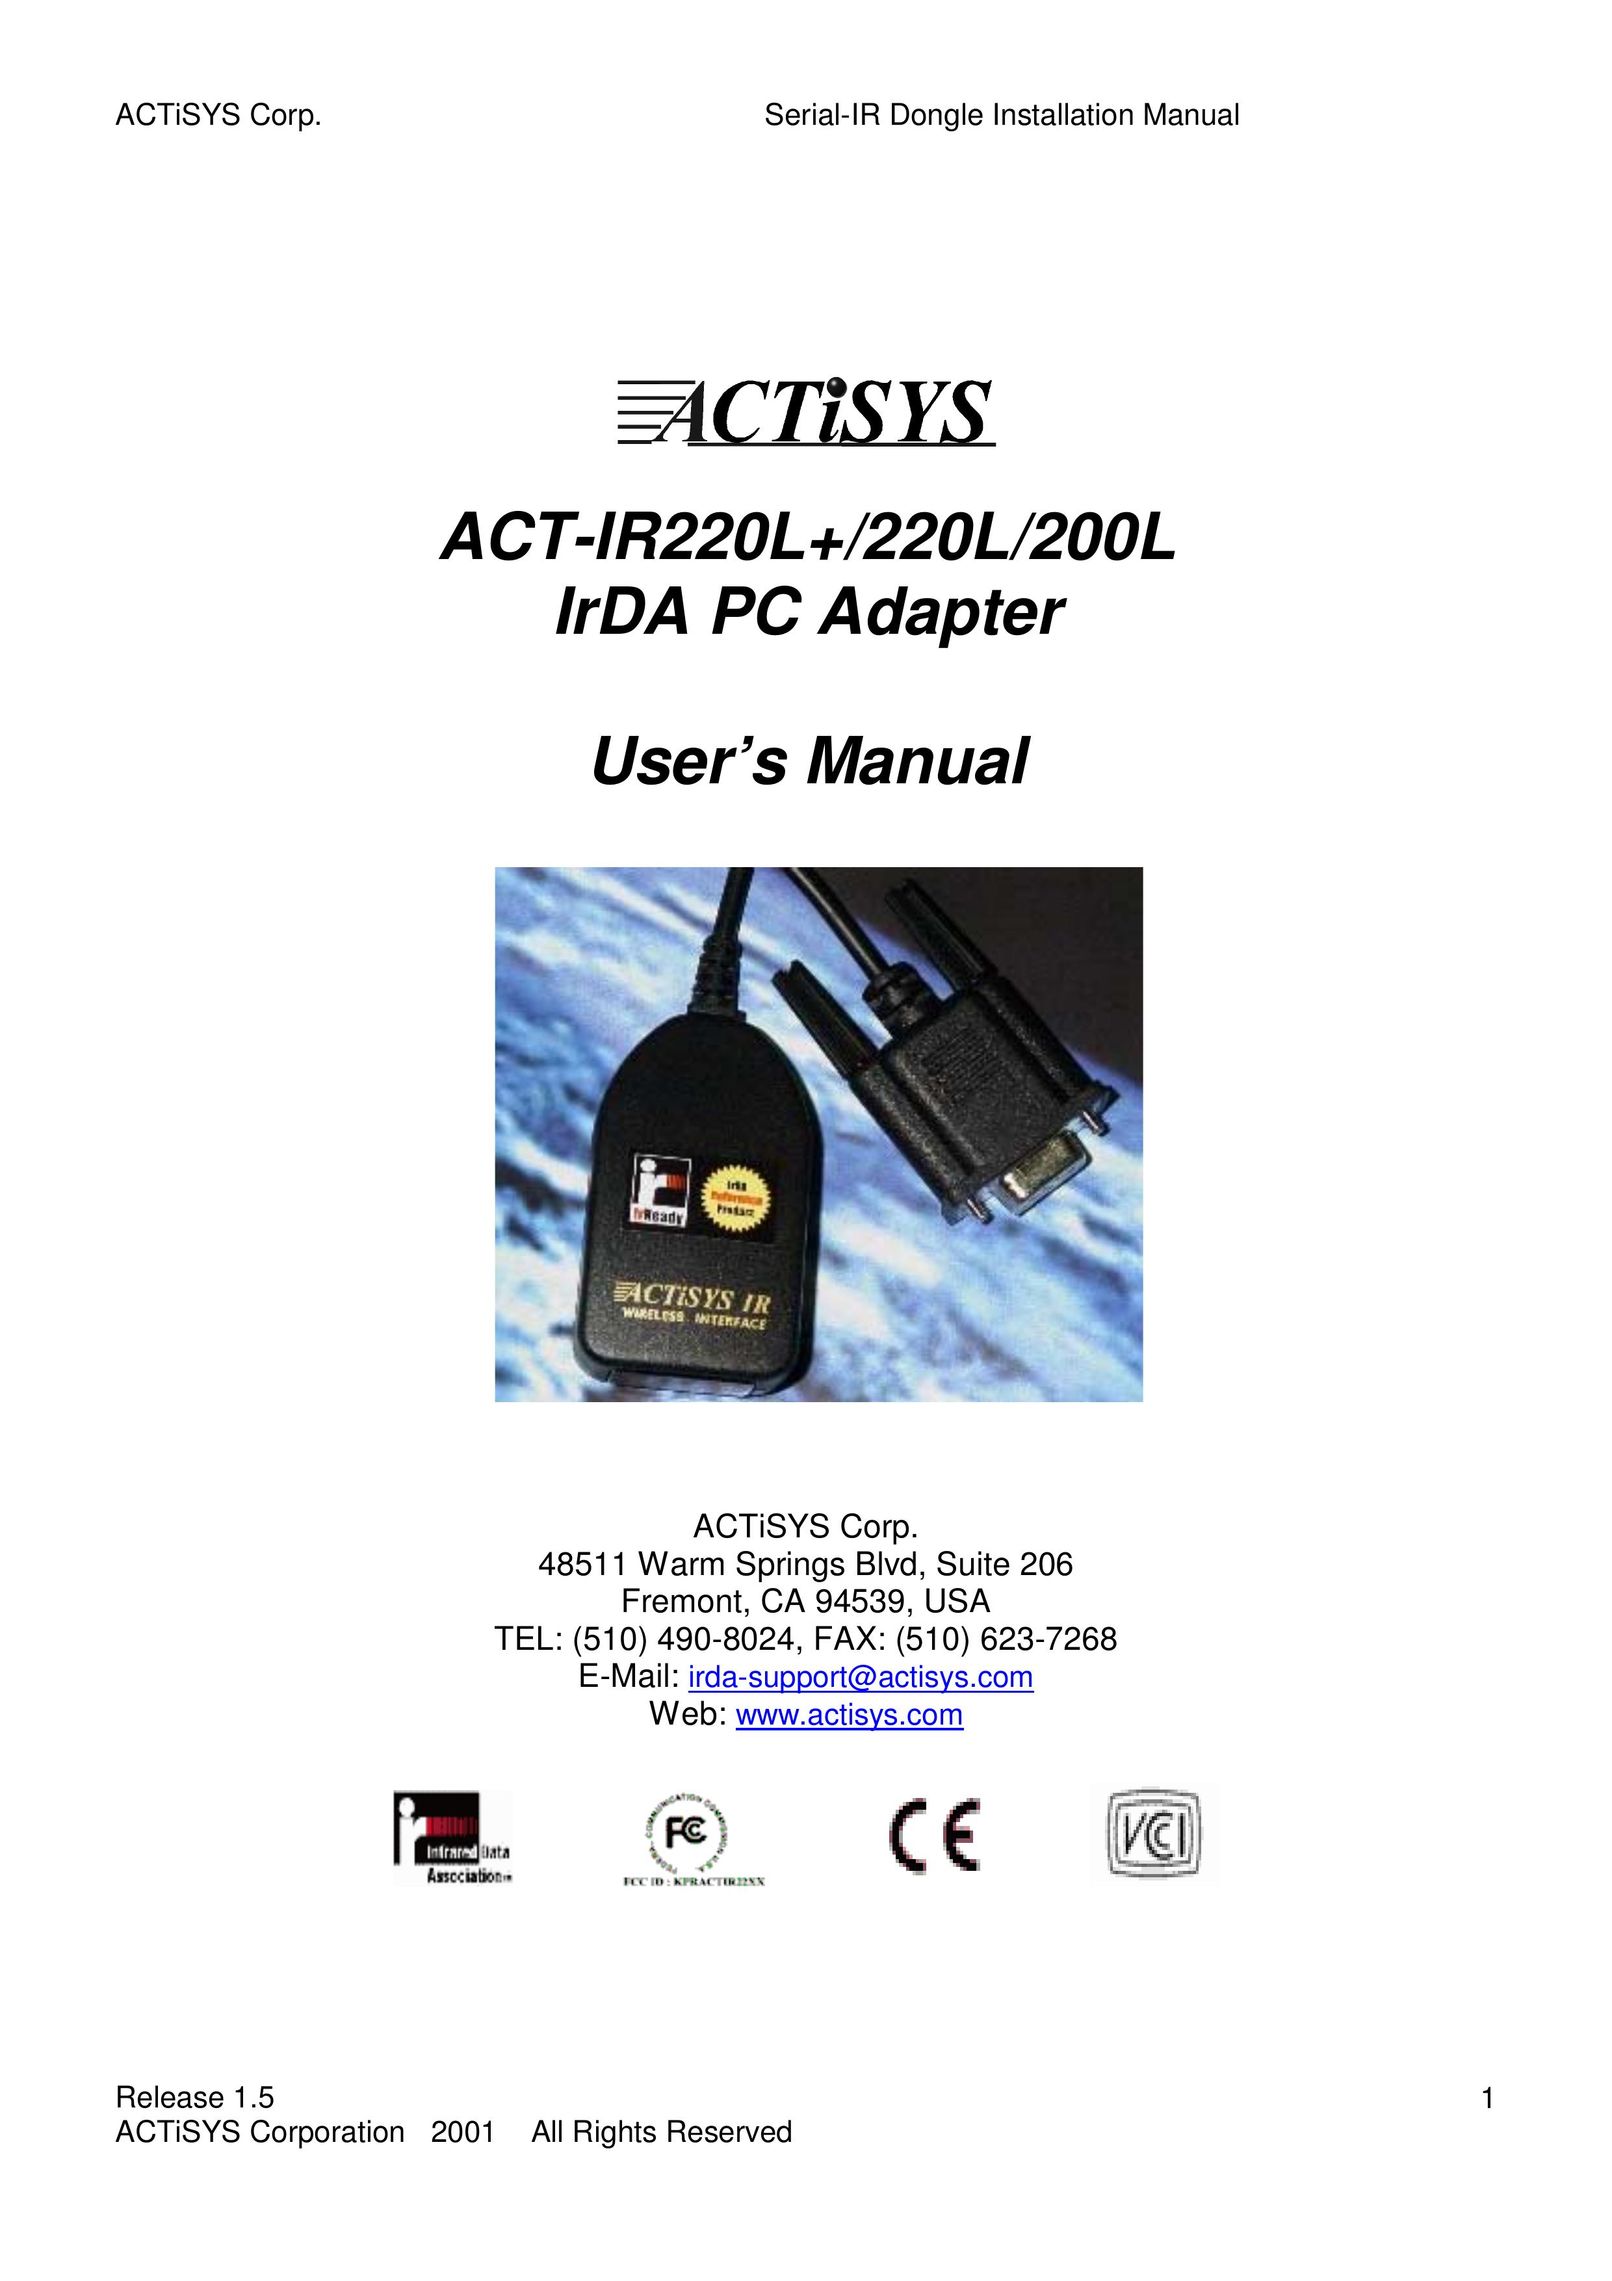 ACTiSYS ACT-IR200L Computer Accessories User Manual (Page 1)